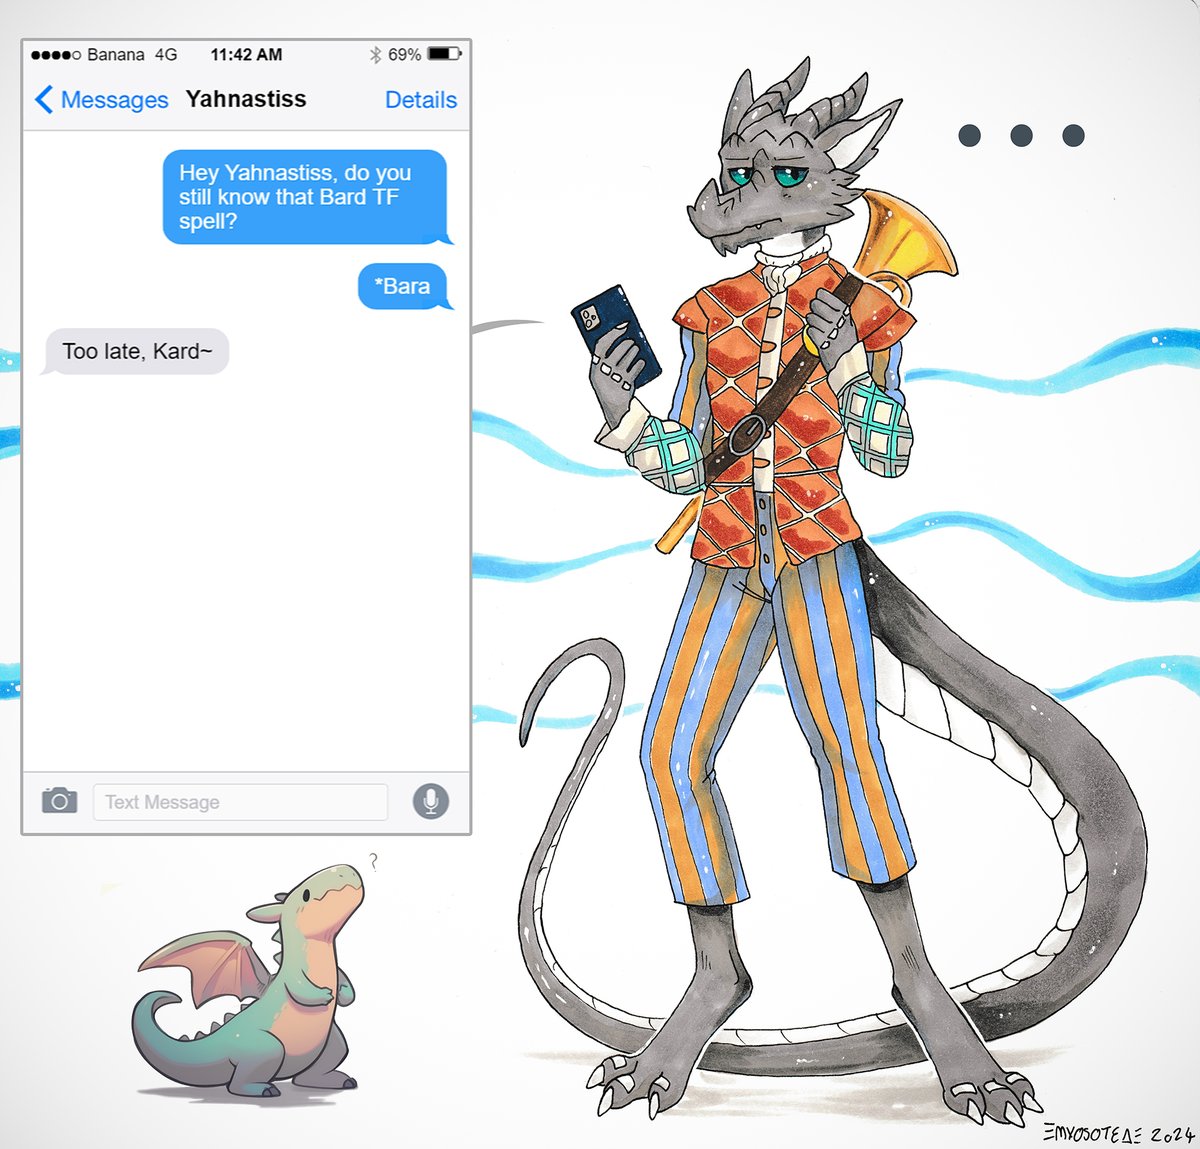 Kardukk was ready to text his way to a more muscular reality, but autocorrect intervened, leading the grey kobold knight down a different path. 🎶 Eh, Bard is a good class in BG3 anyway! xD Trad' artwork on the right 🖌 © @Myosotea @ #Faun4 Additions on the left 🖌 © Me ;p